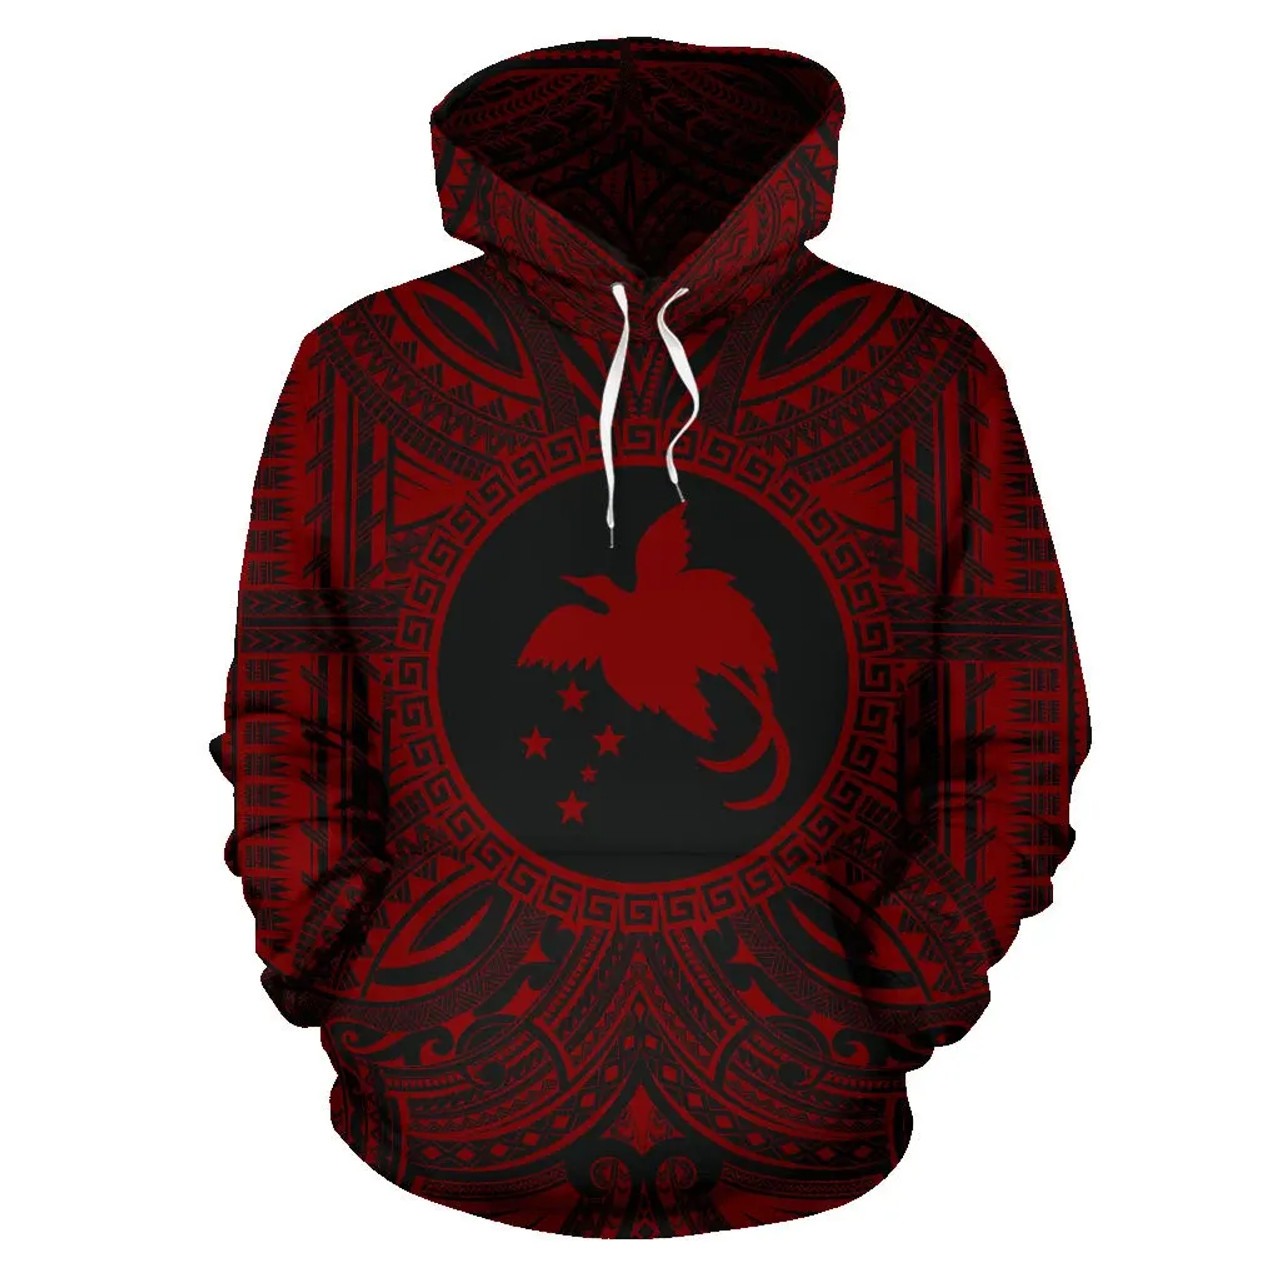 Papua New Guinea 1 ll Over Hoodie - Papua New Guinea 1 Coat Of Arms Polynesian Red Black